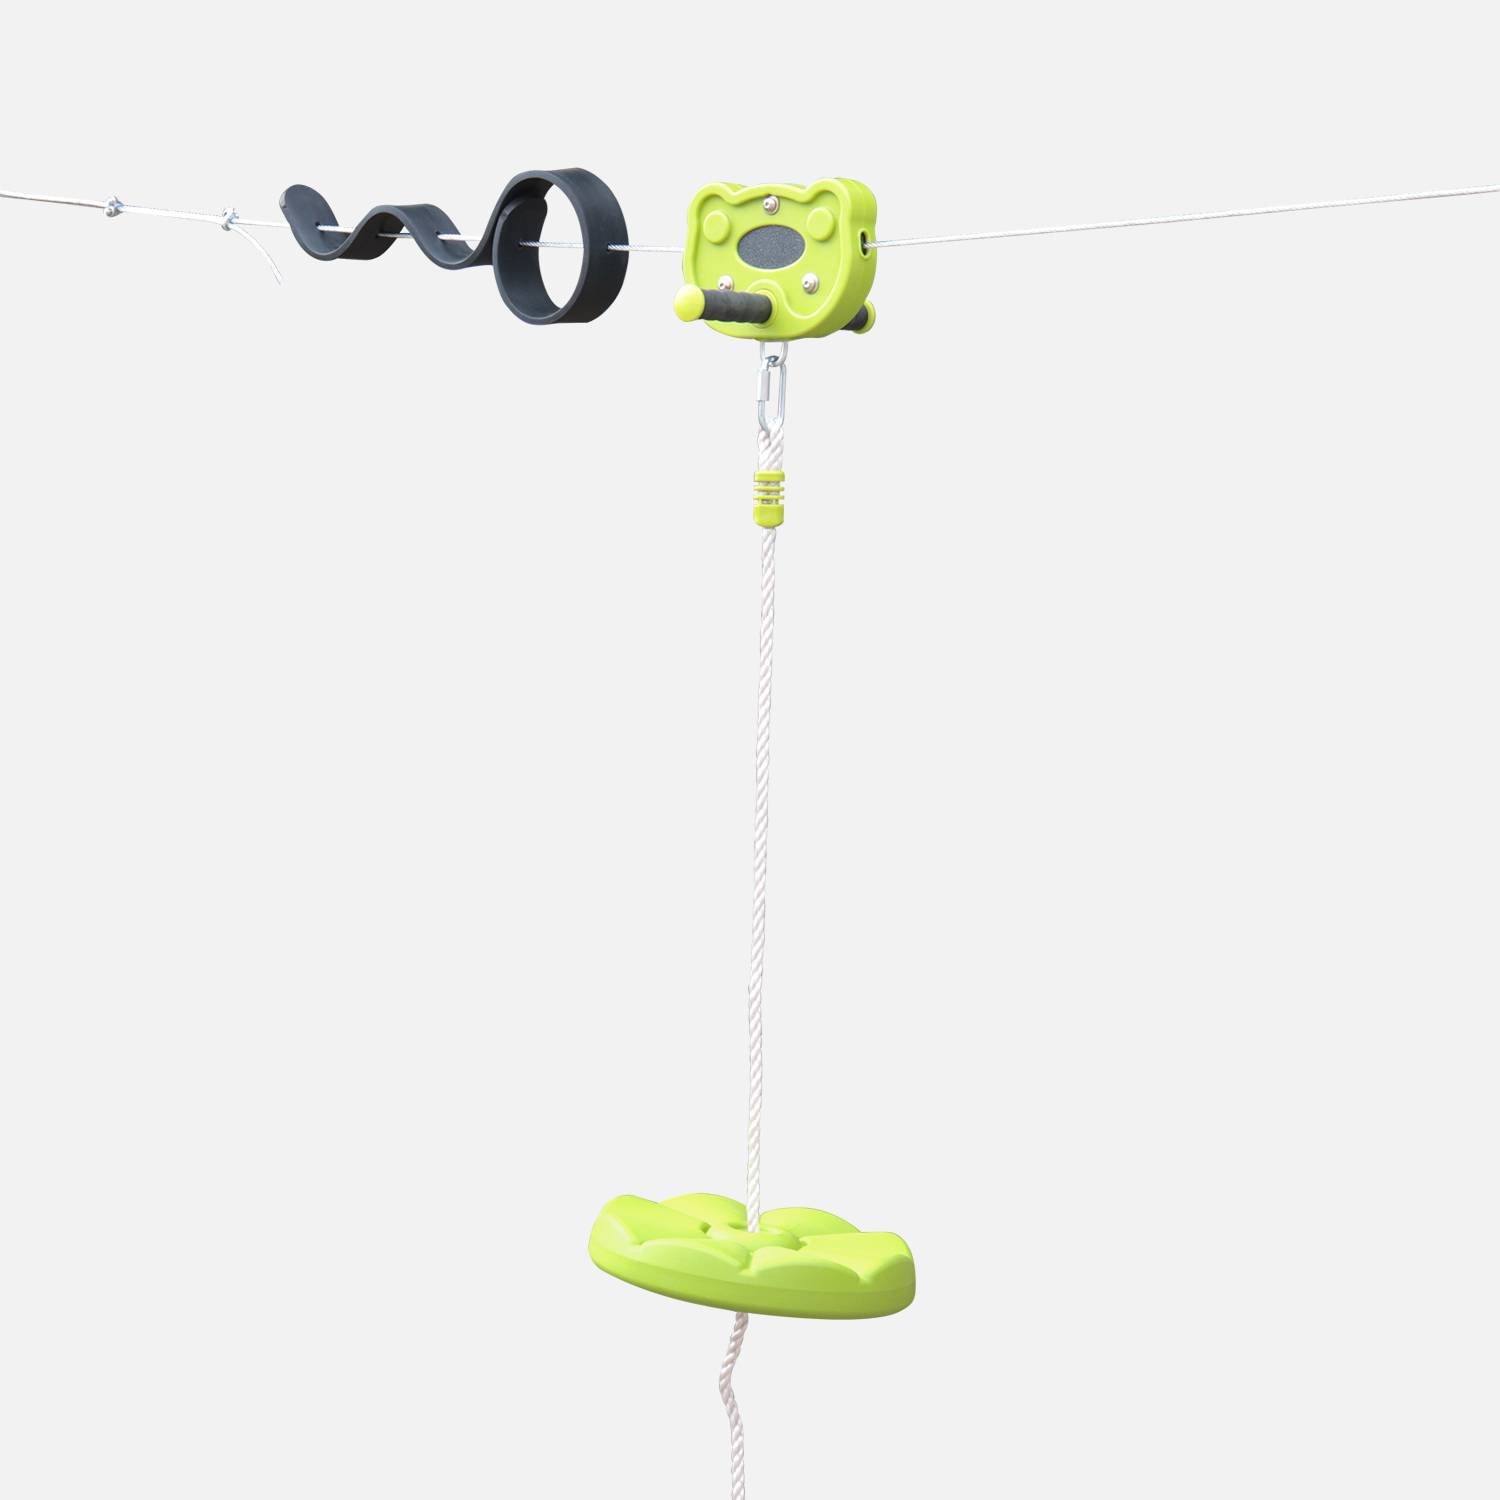 Zip line for children, 30m long with disc swing, anti-slip handles, cushioning system - Alize,sweeek,Photo1